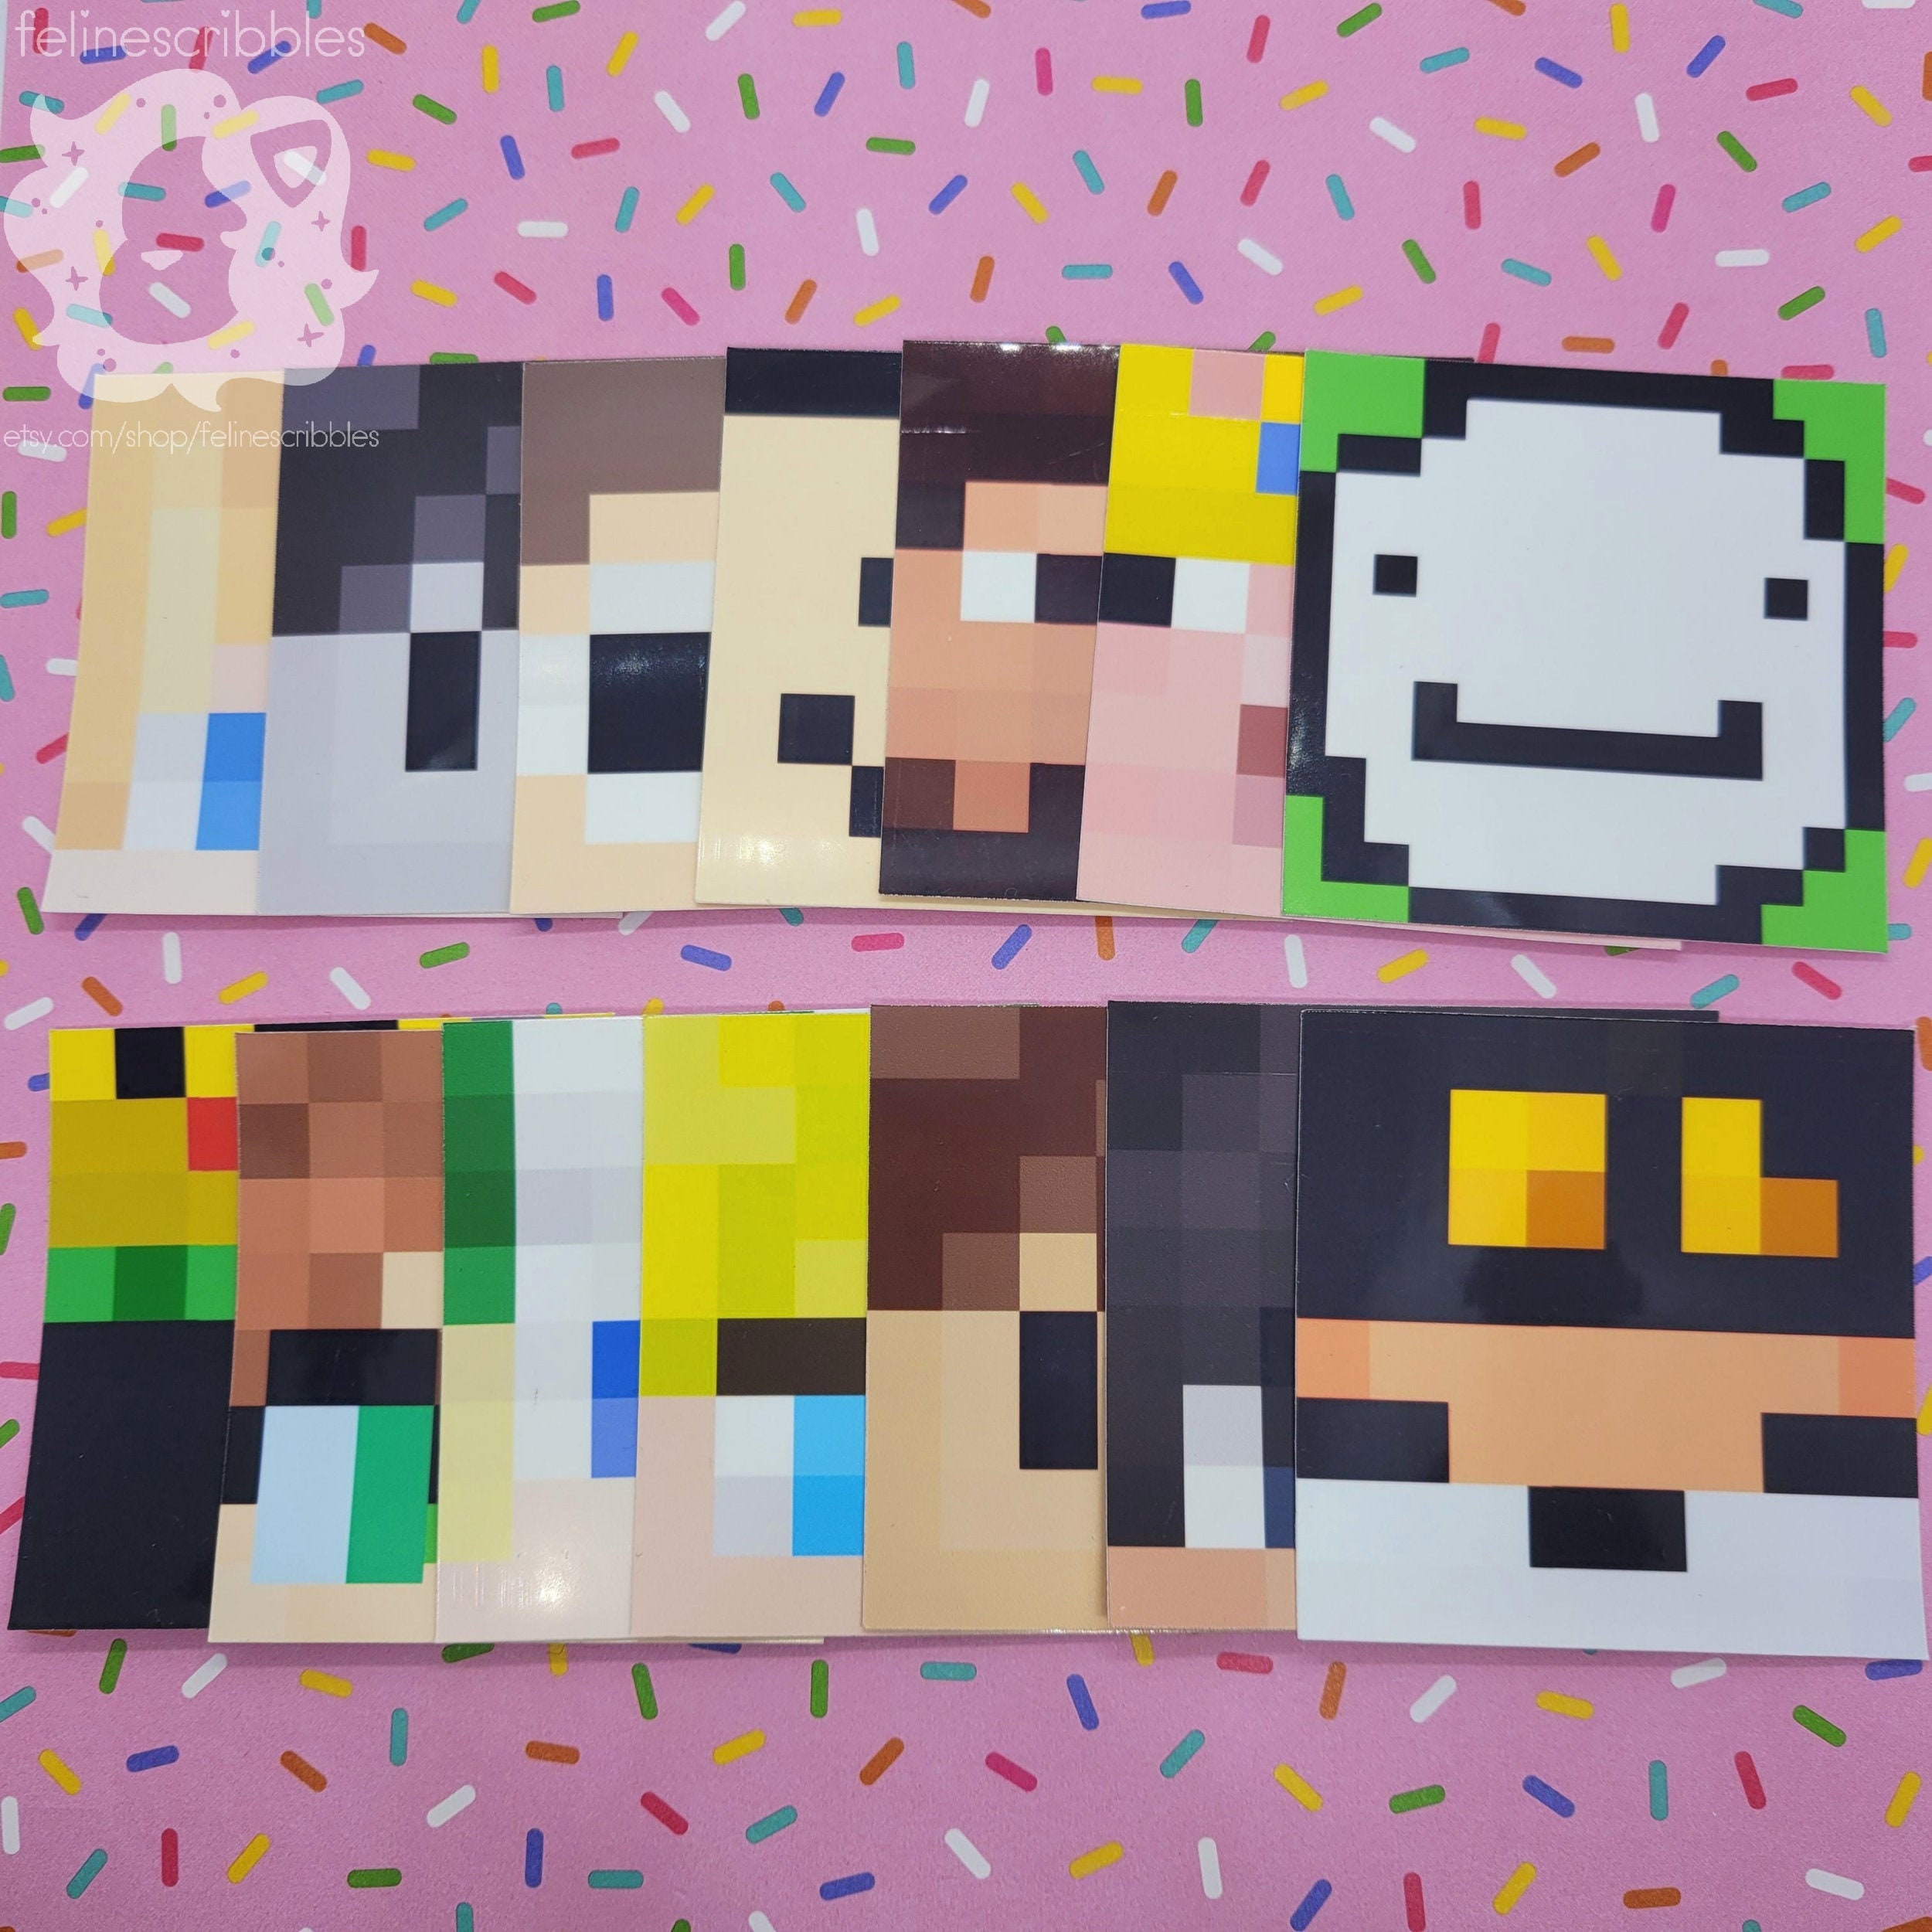 Dream Smp Youtubers Minecraft Skin Face Glossy Vinyl Stickers Etsy